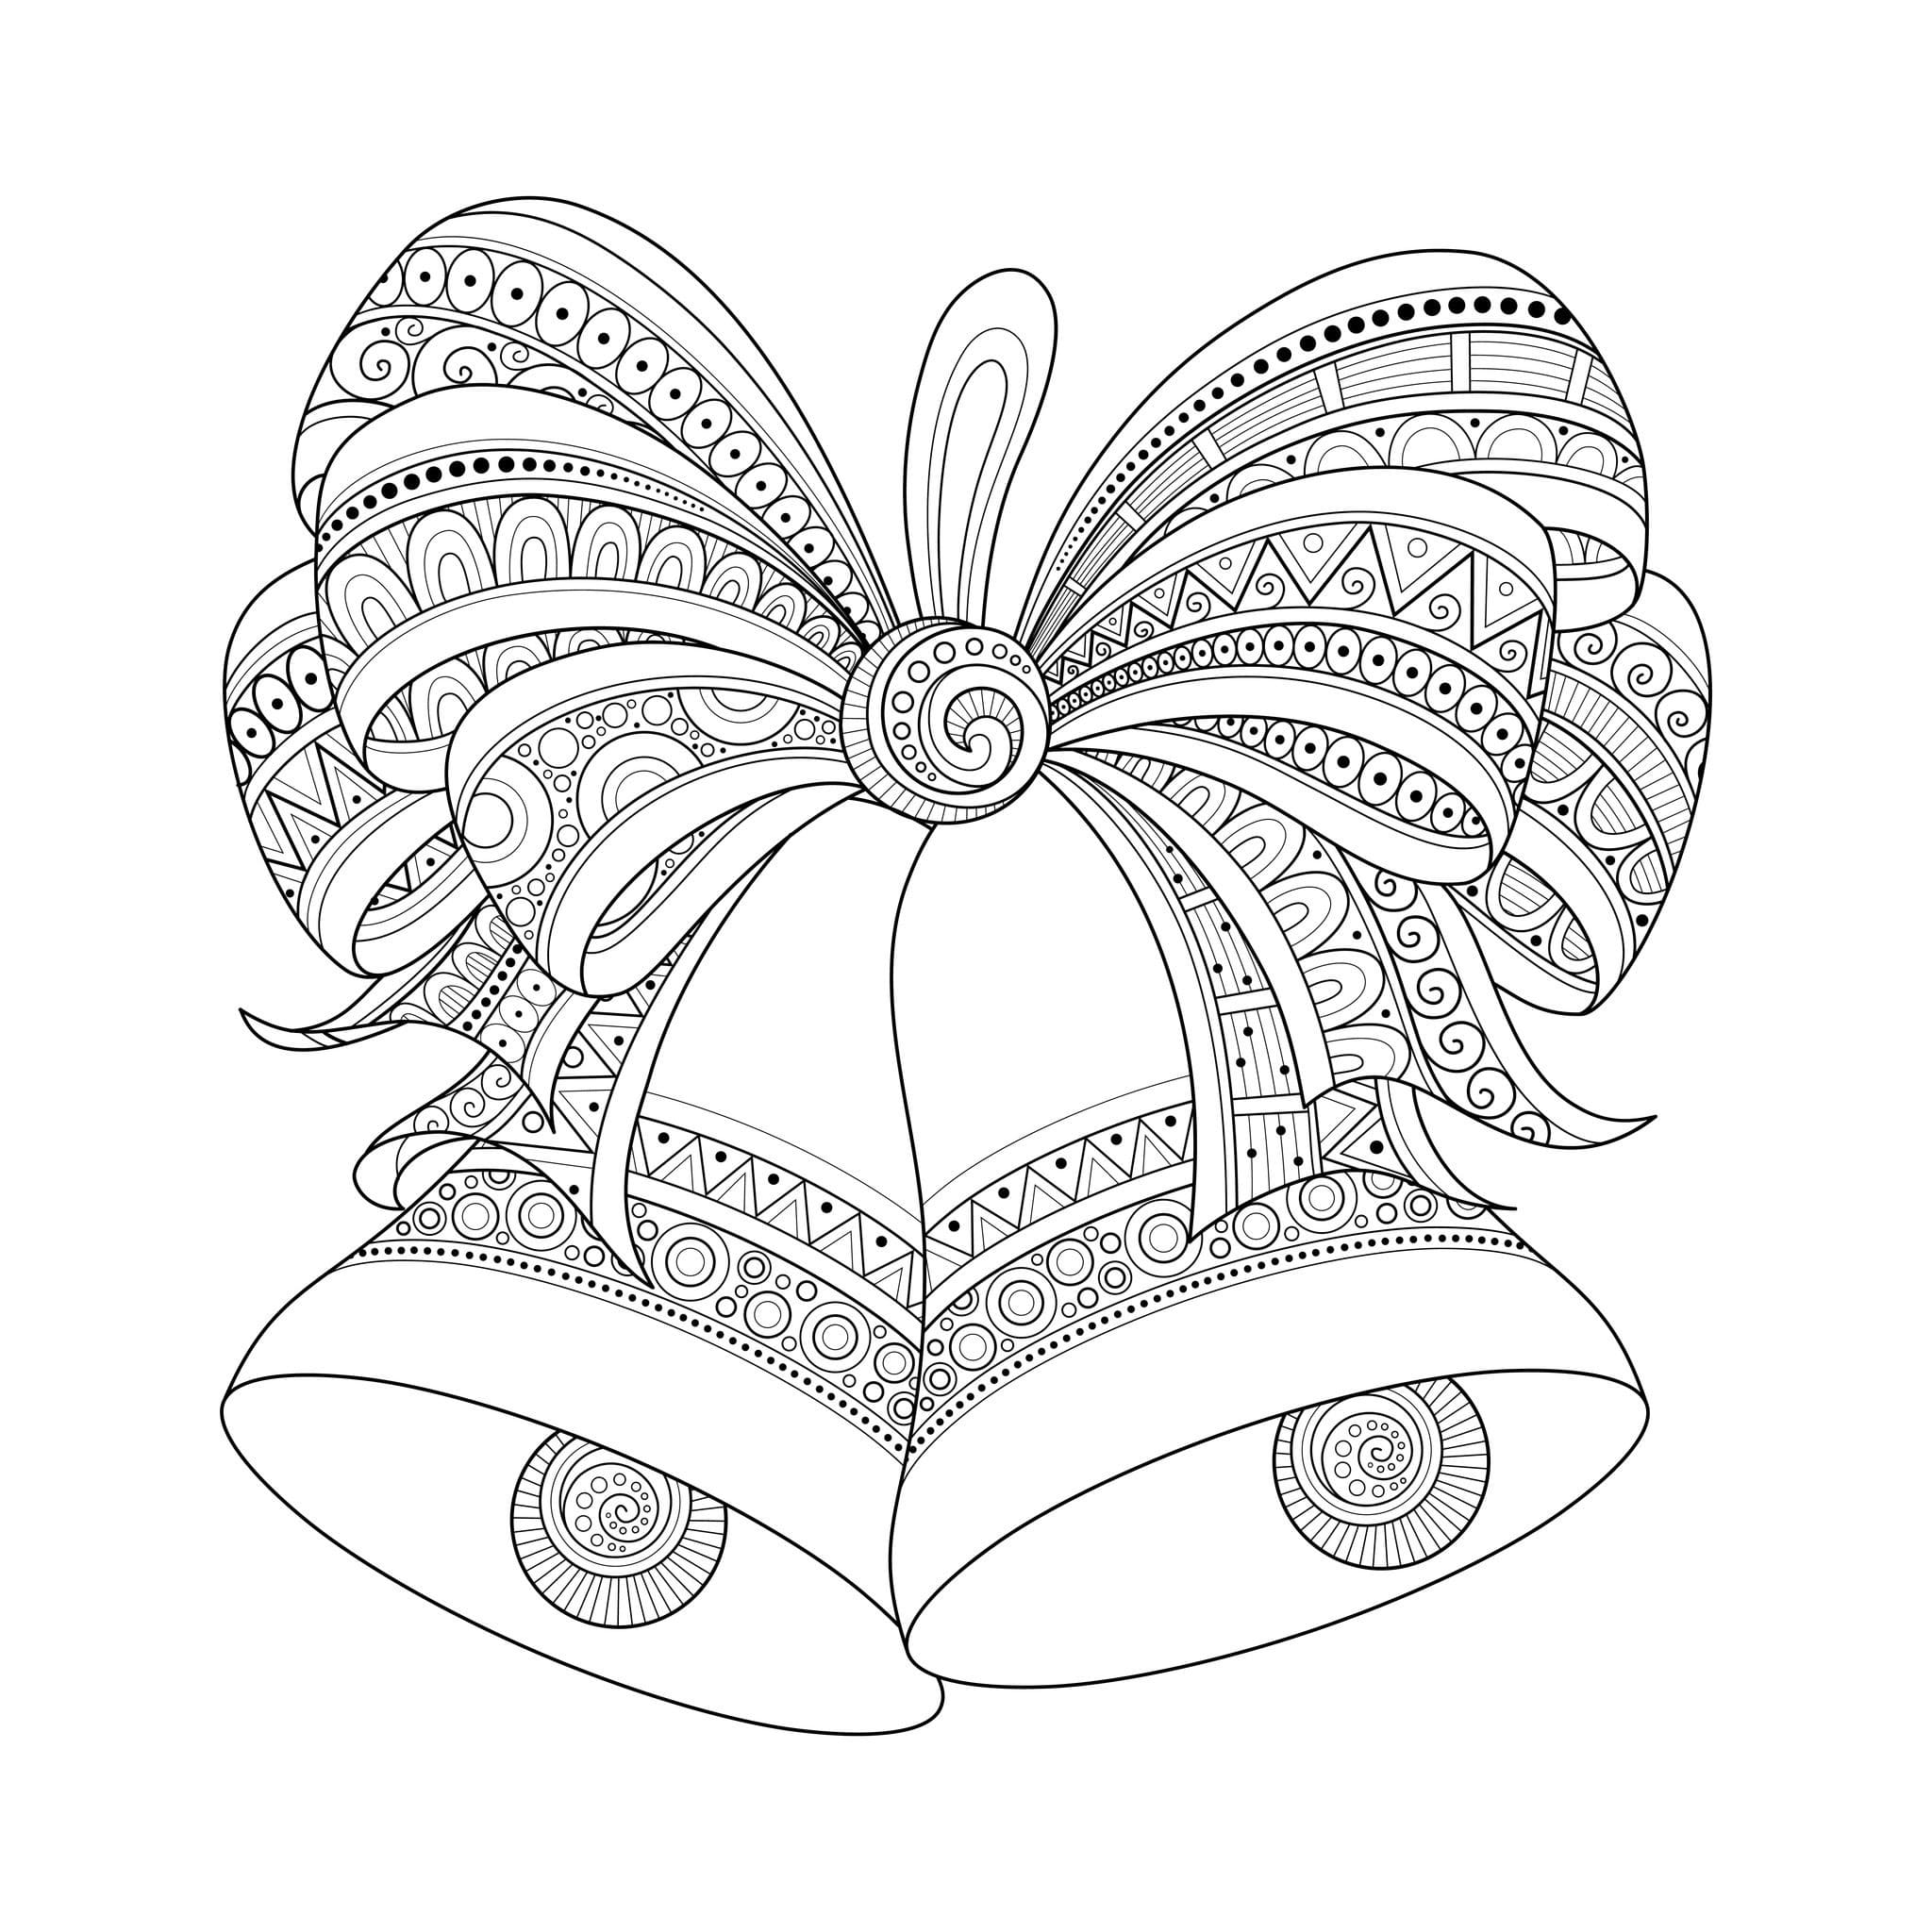 Magic ringing of New Year’s Bells Coloring Page